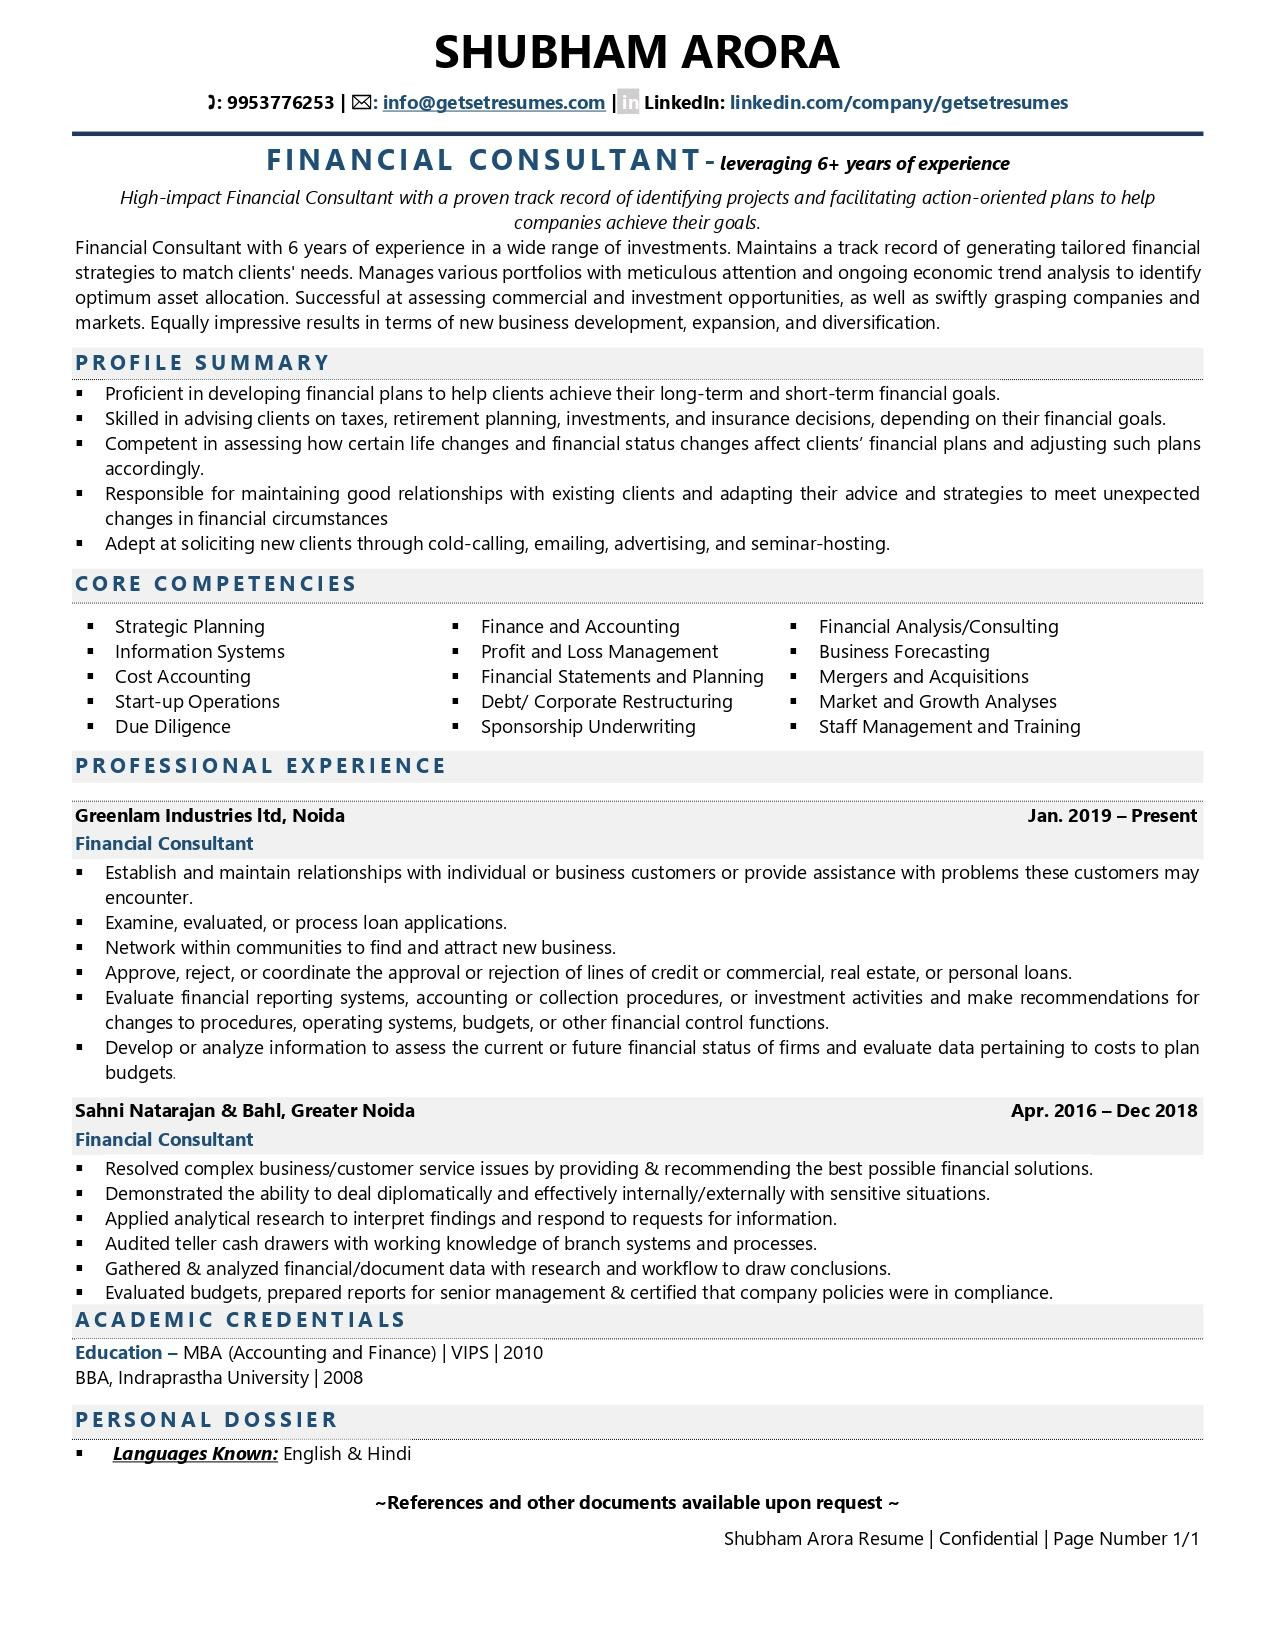 Free Sample Resume for Financial Advisor Financial Consultant Resume Examples & Template (with Job Winning …